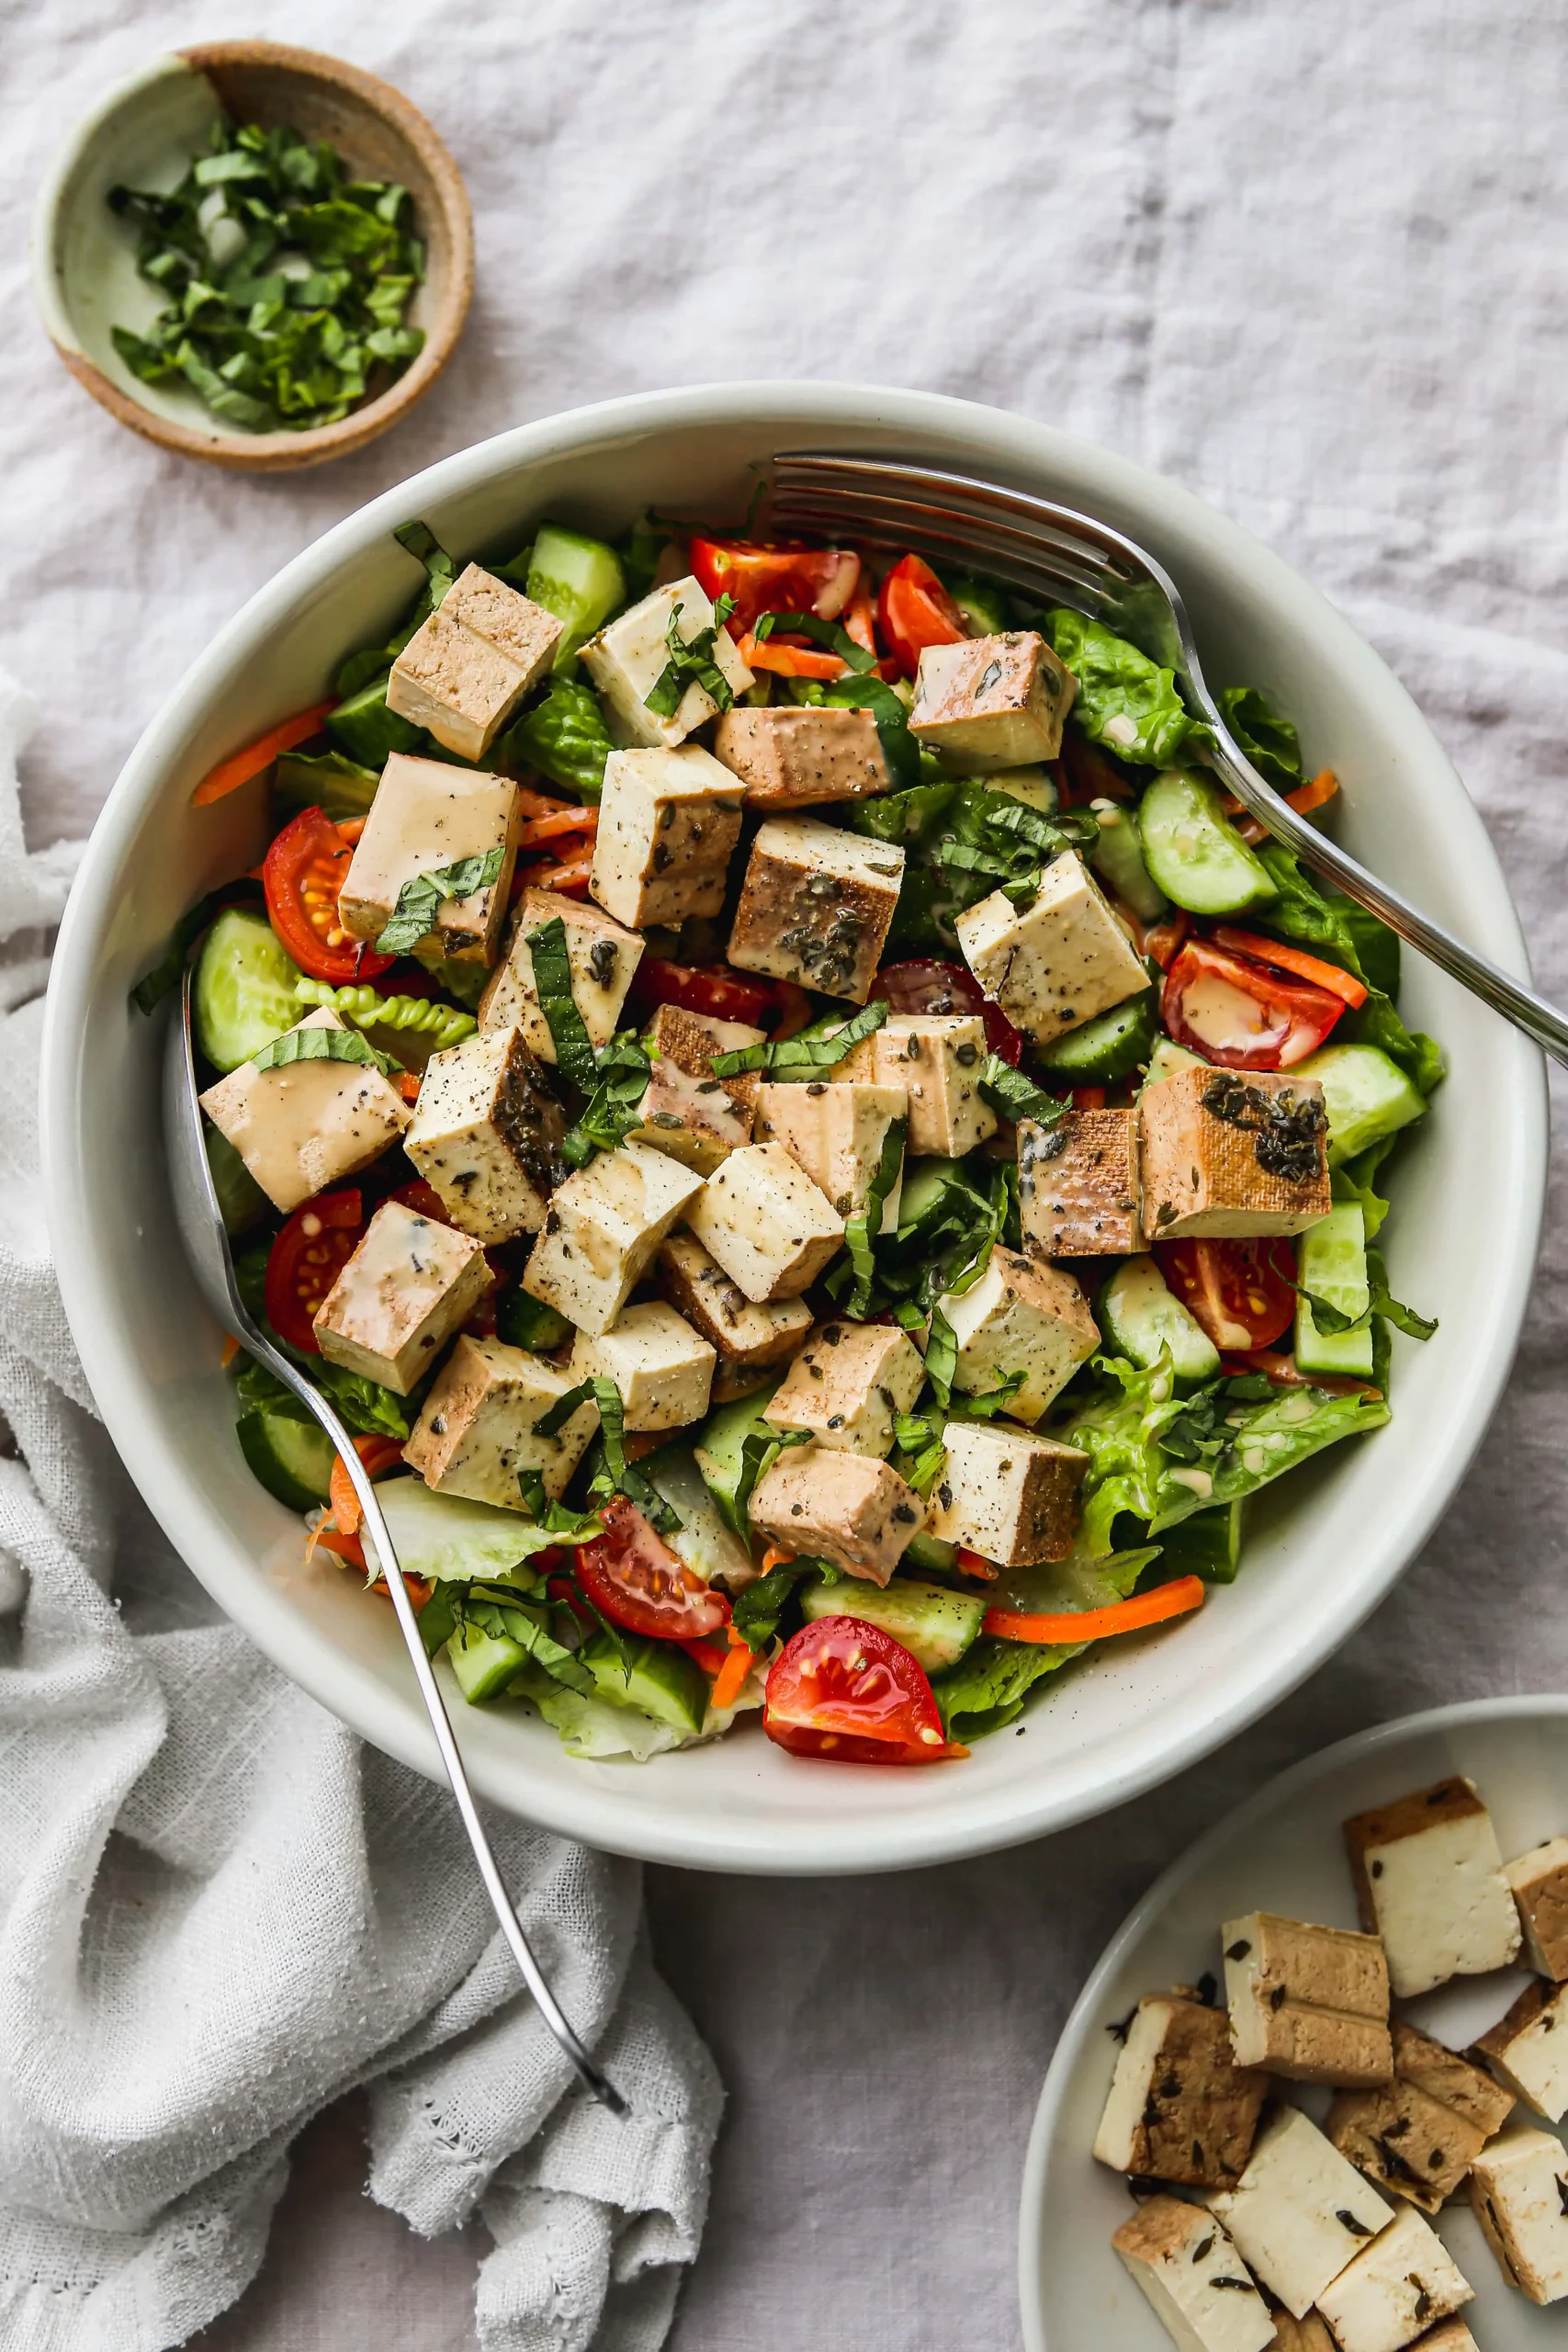 recipes for smoked tofu - What is the tastiest way to make tofu